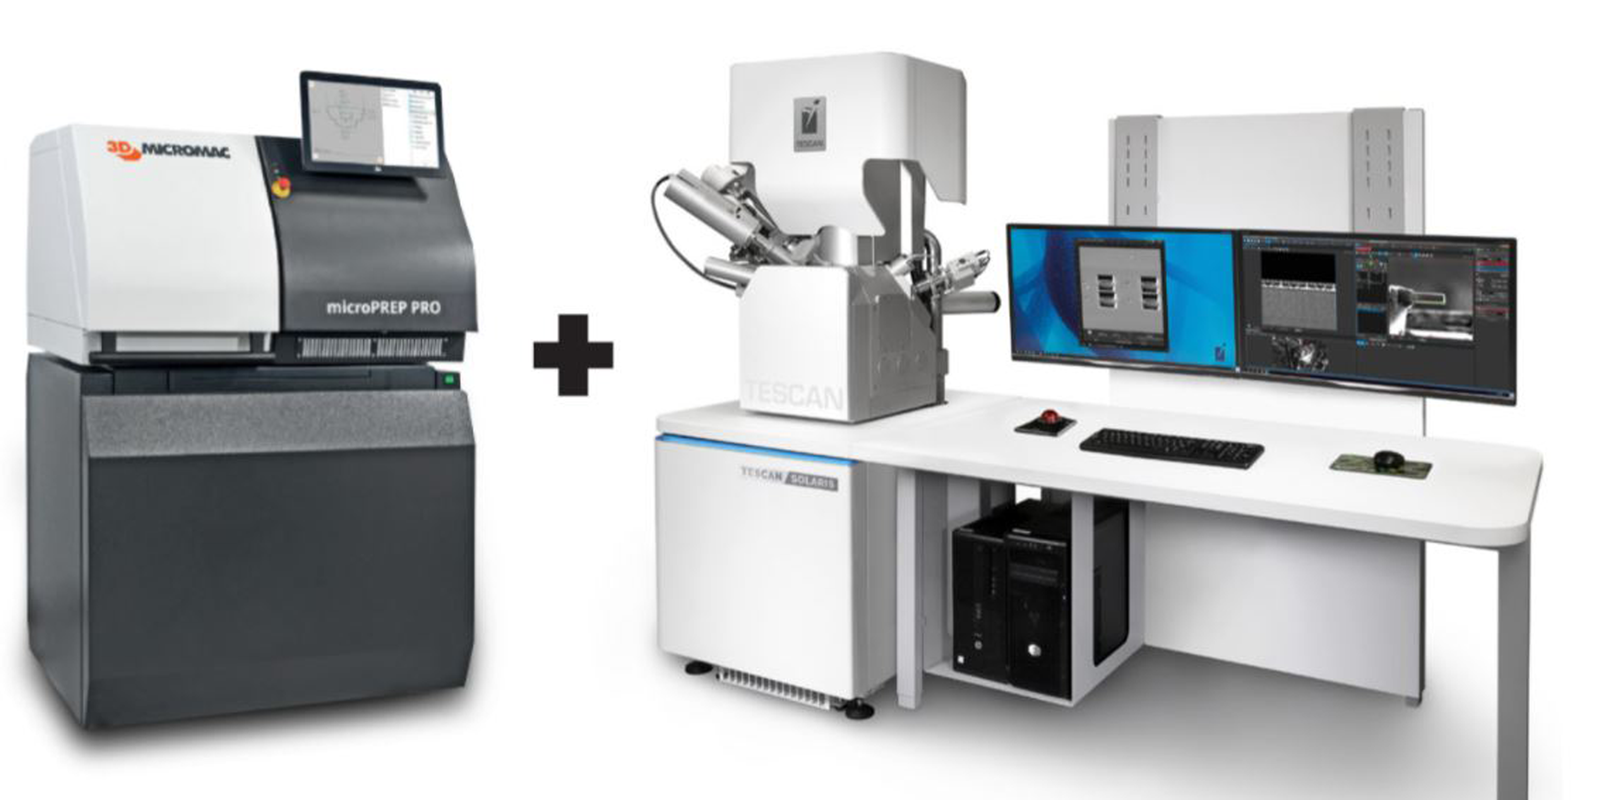 TESCAN Installed Groundbreaking Micro-CT Systems for In-situ Measurements  in Austria - TESCAN